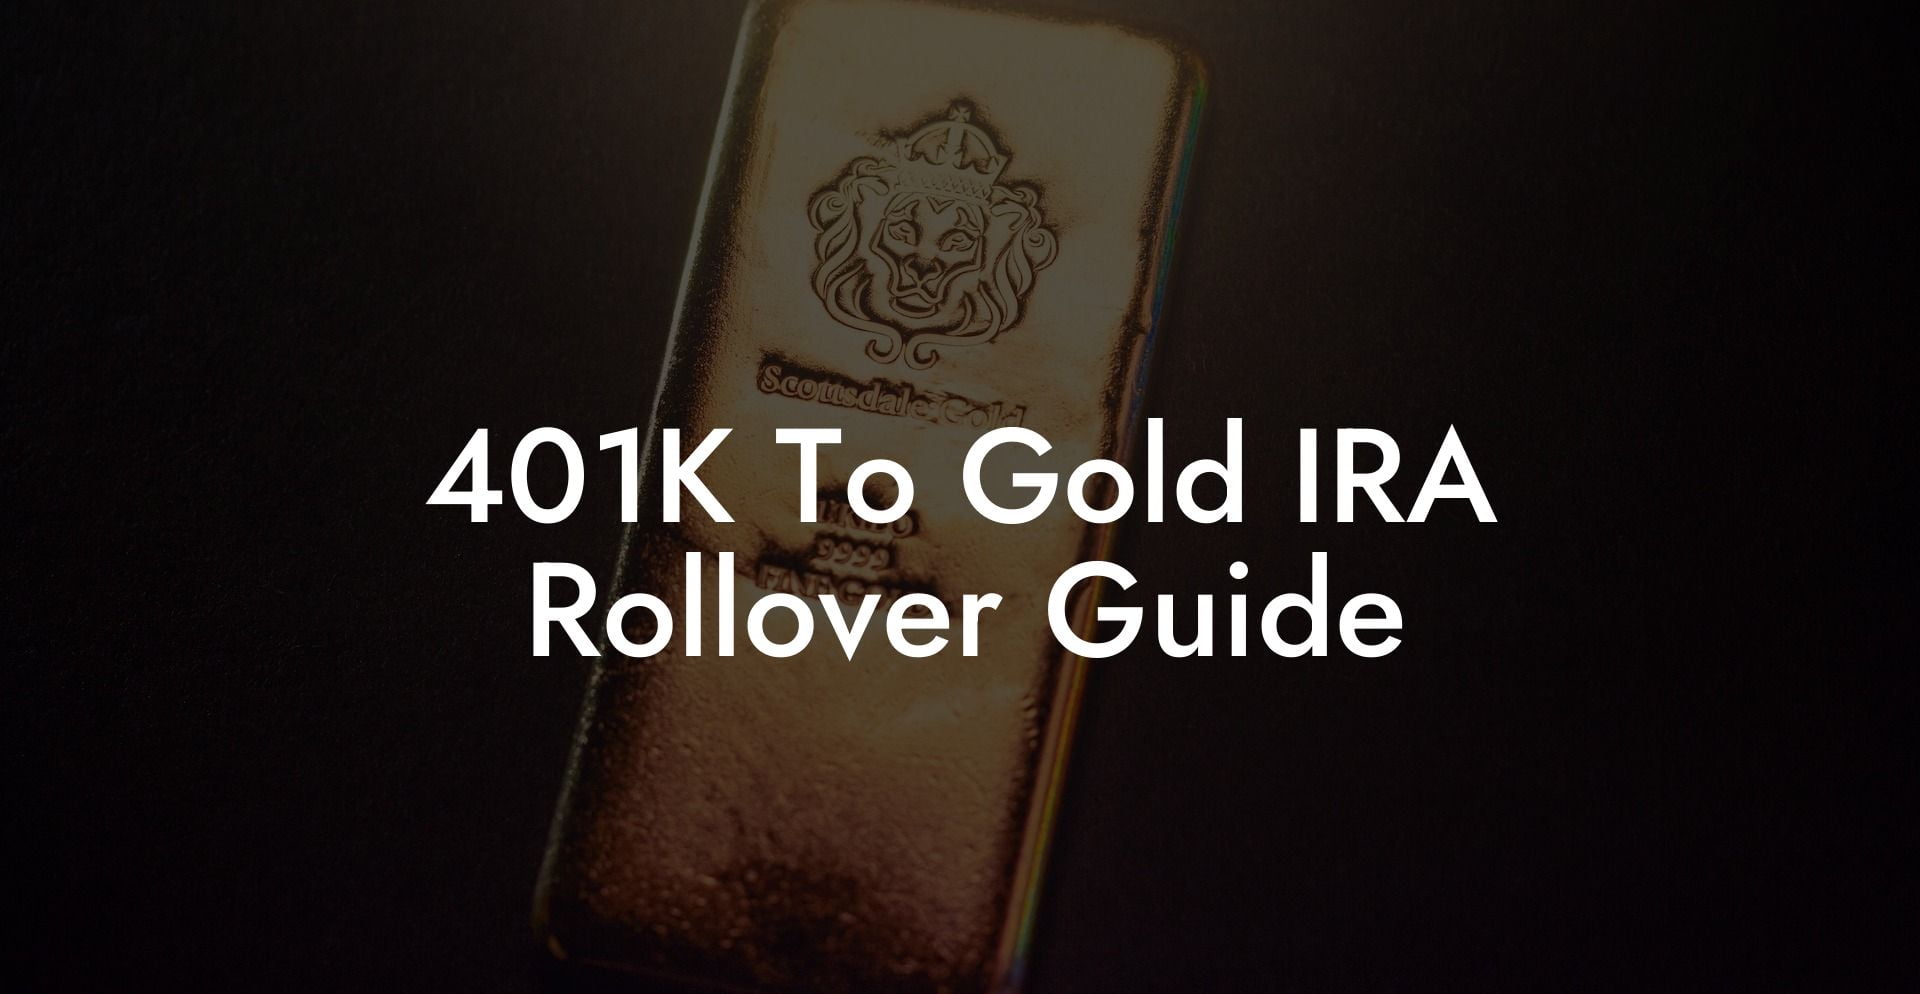 401K To Gold IRA Rollover Guide